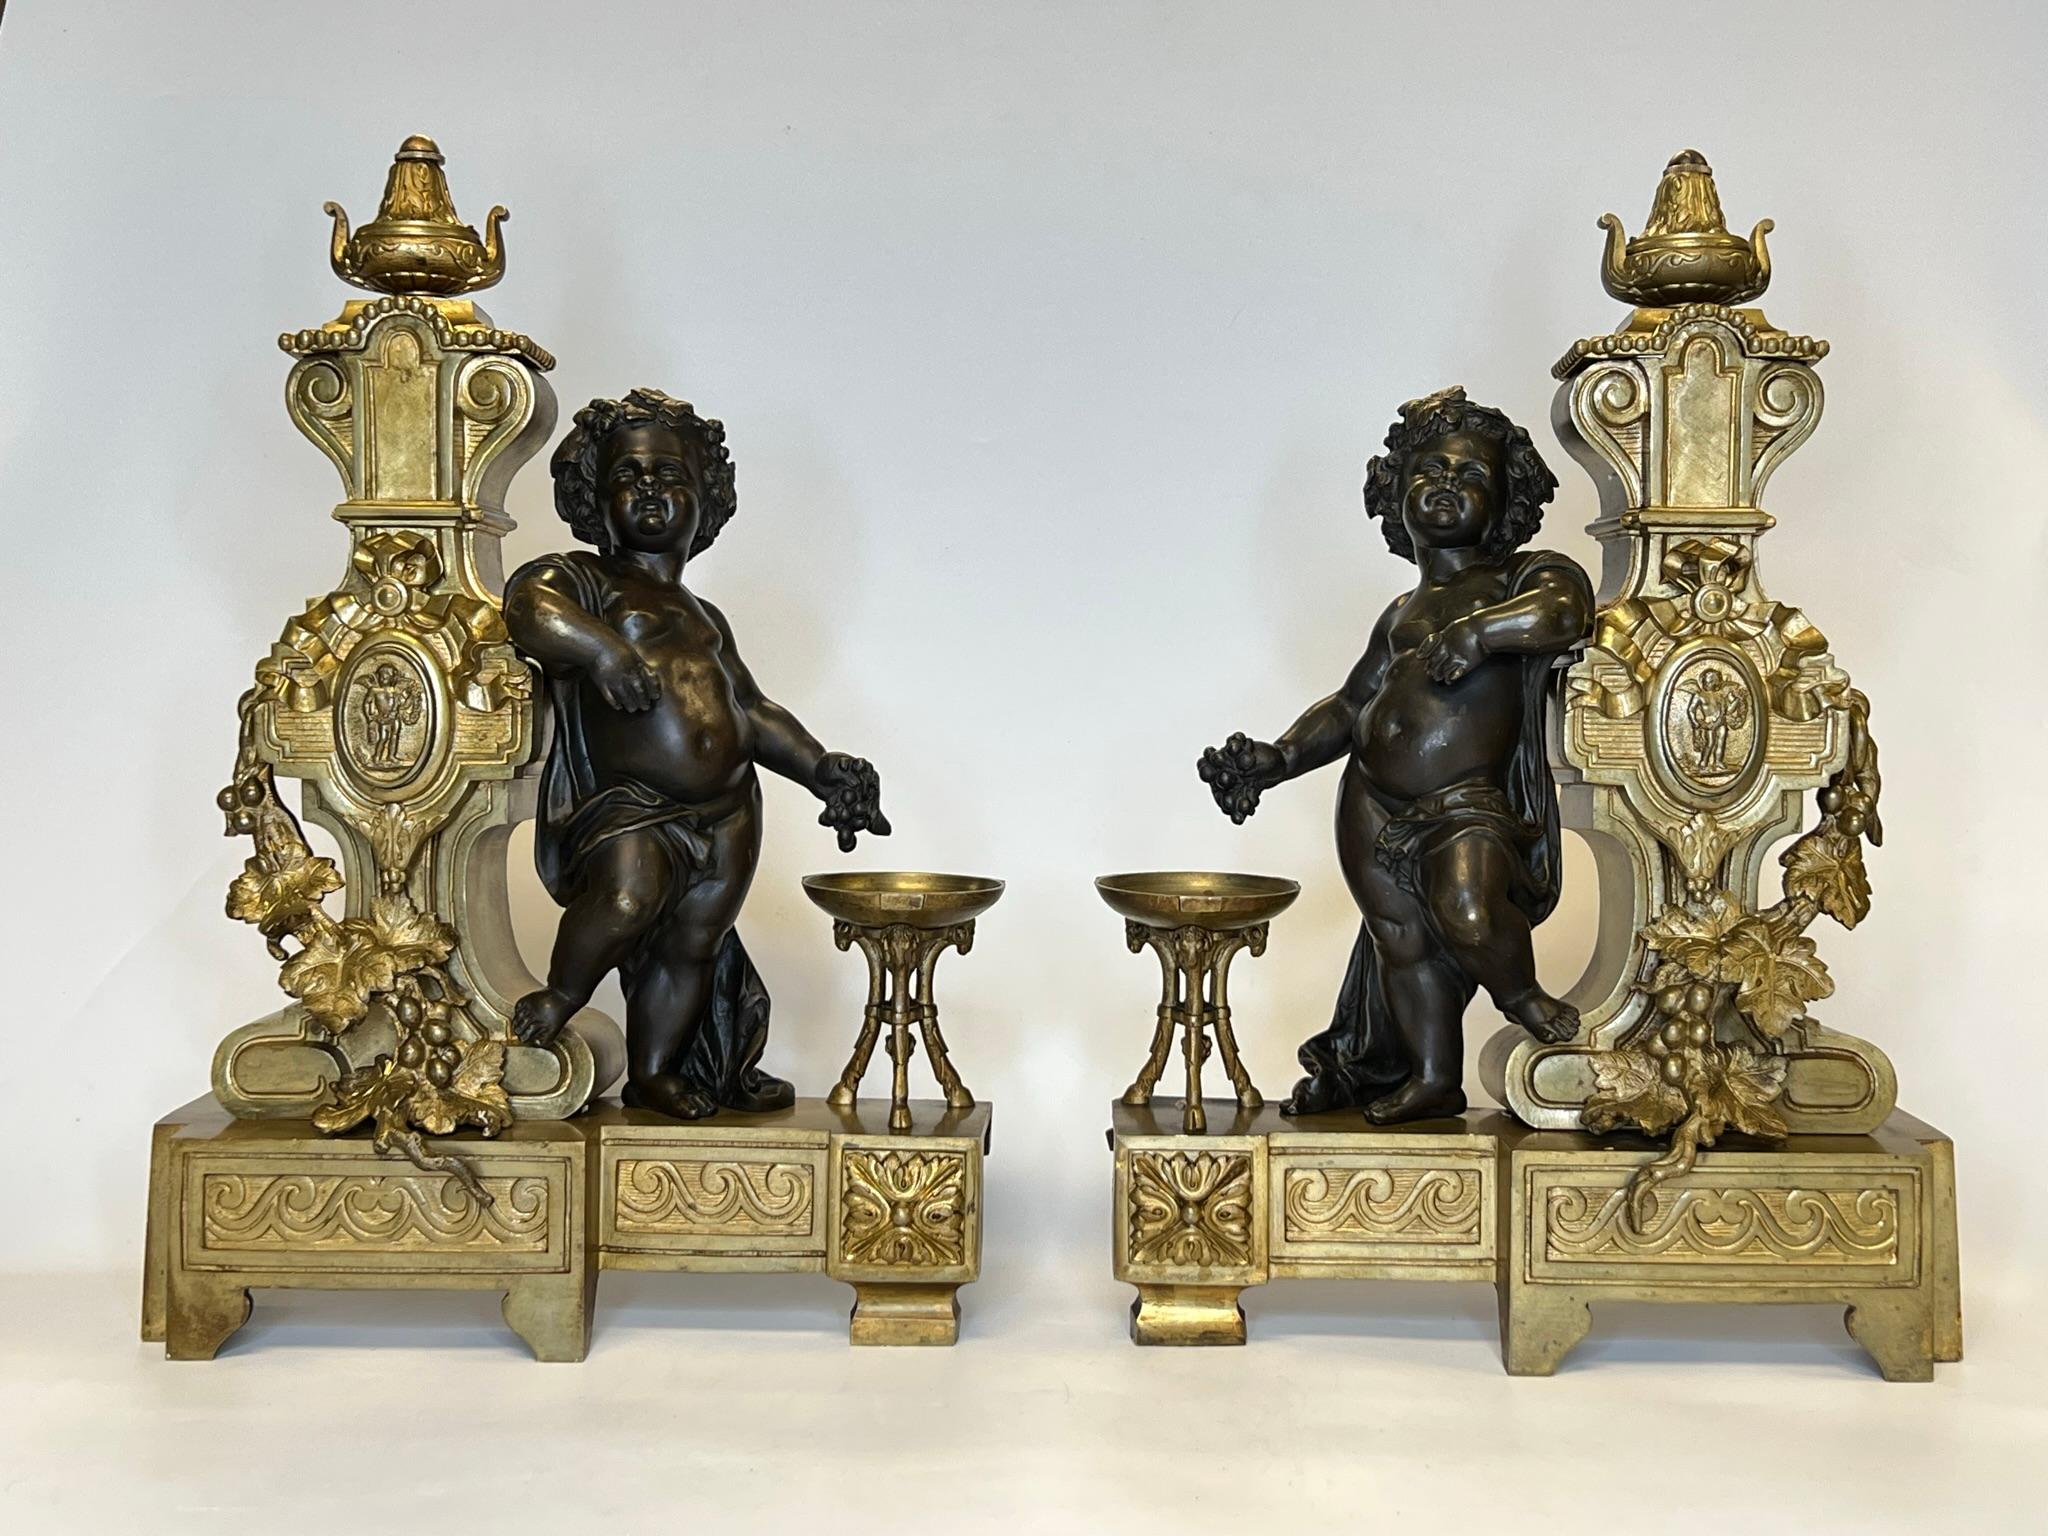 Pair of 19th century French ormolu bronze andirons in the Louis XVI style with patinated bronze figures of standing putti (cherubs).